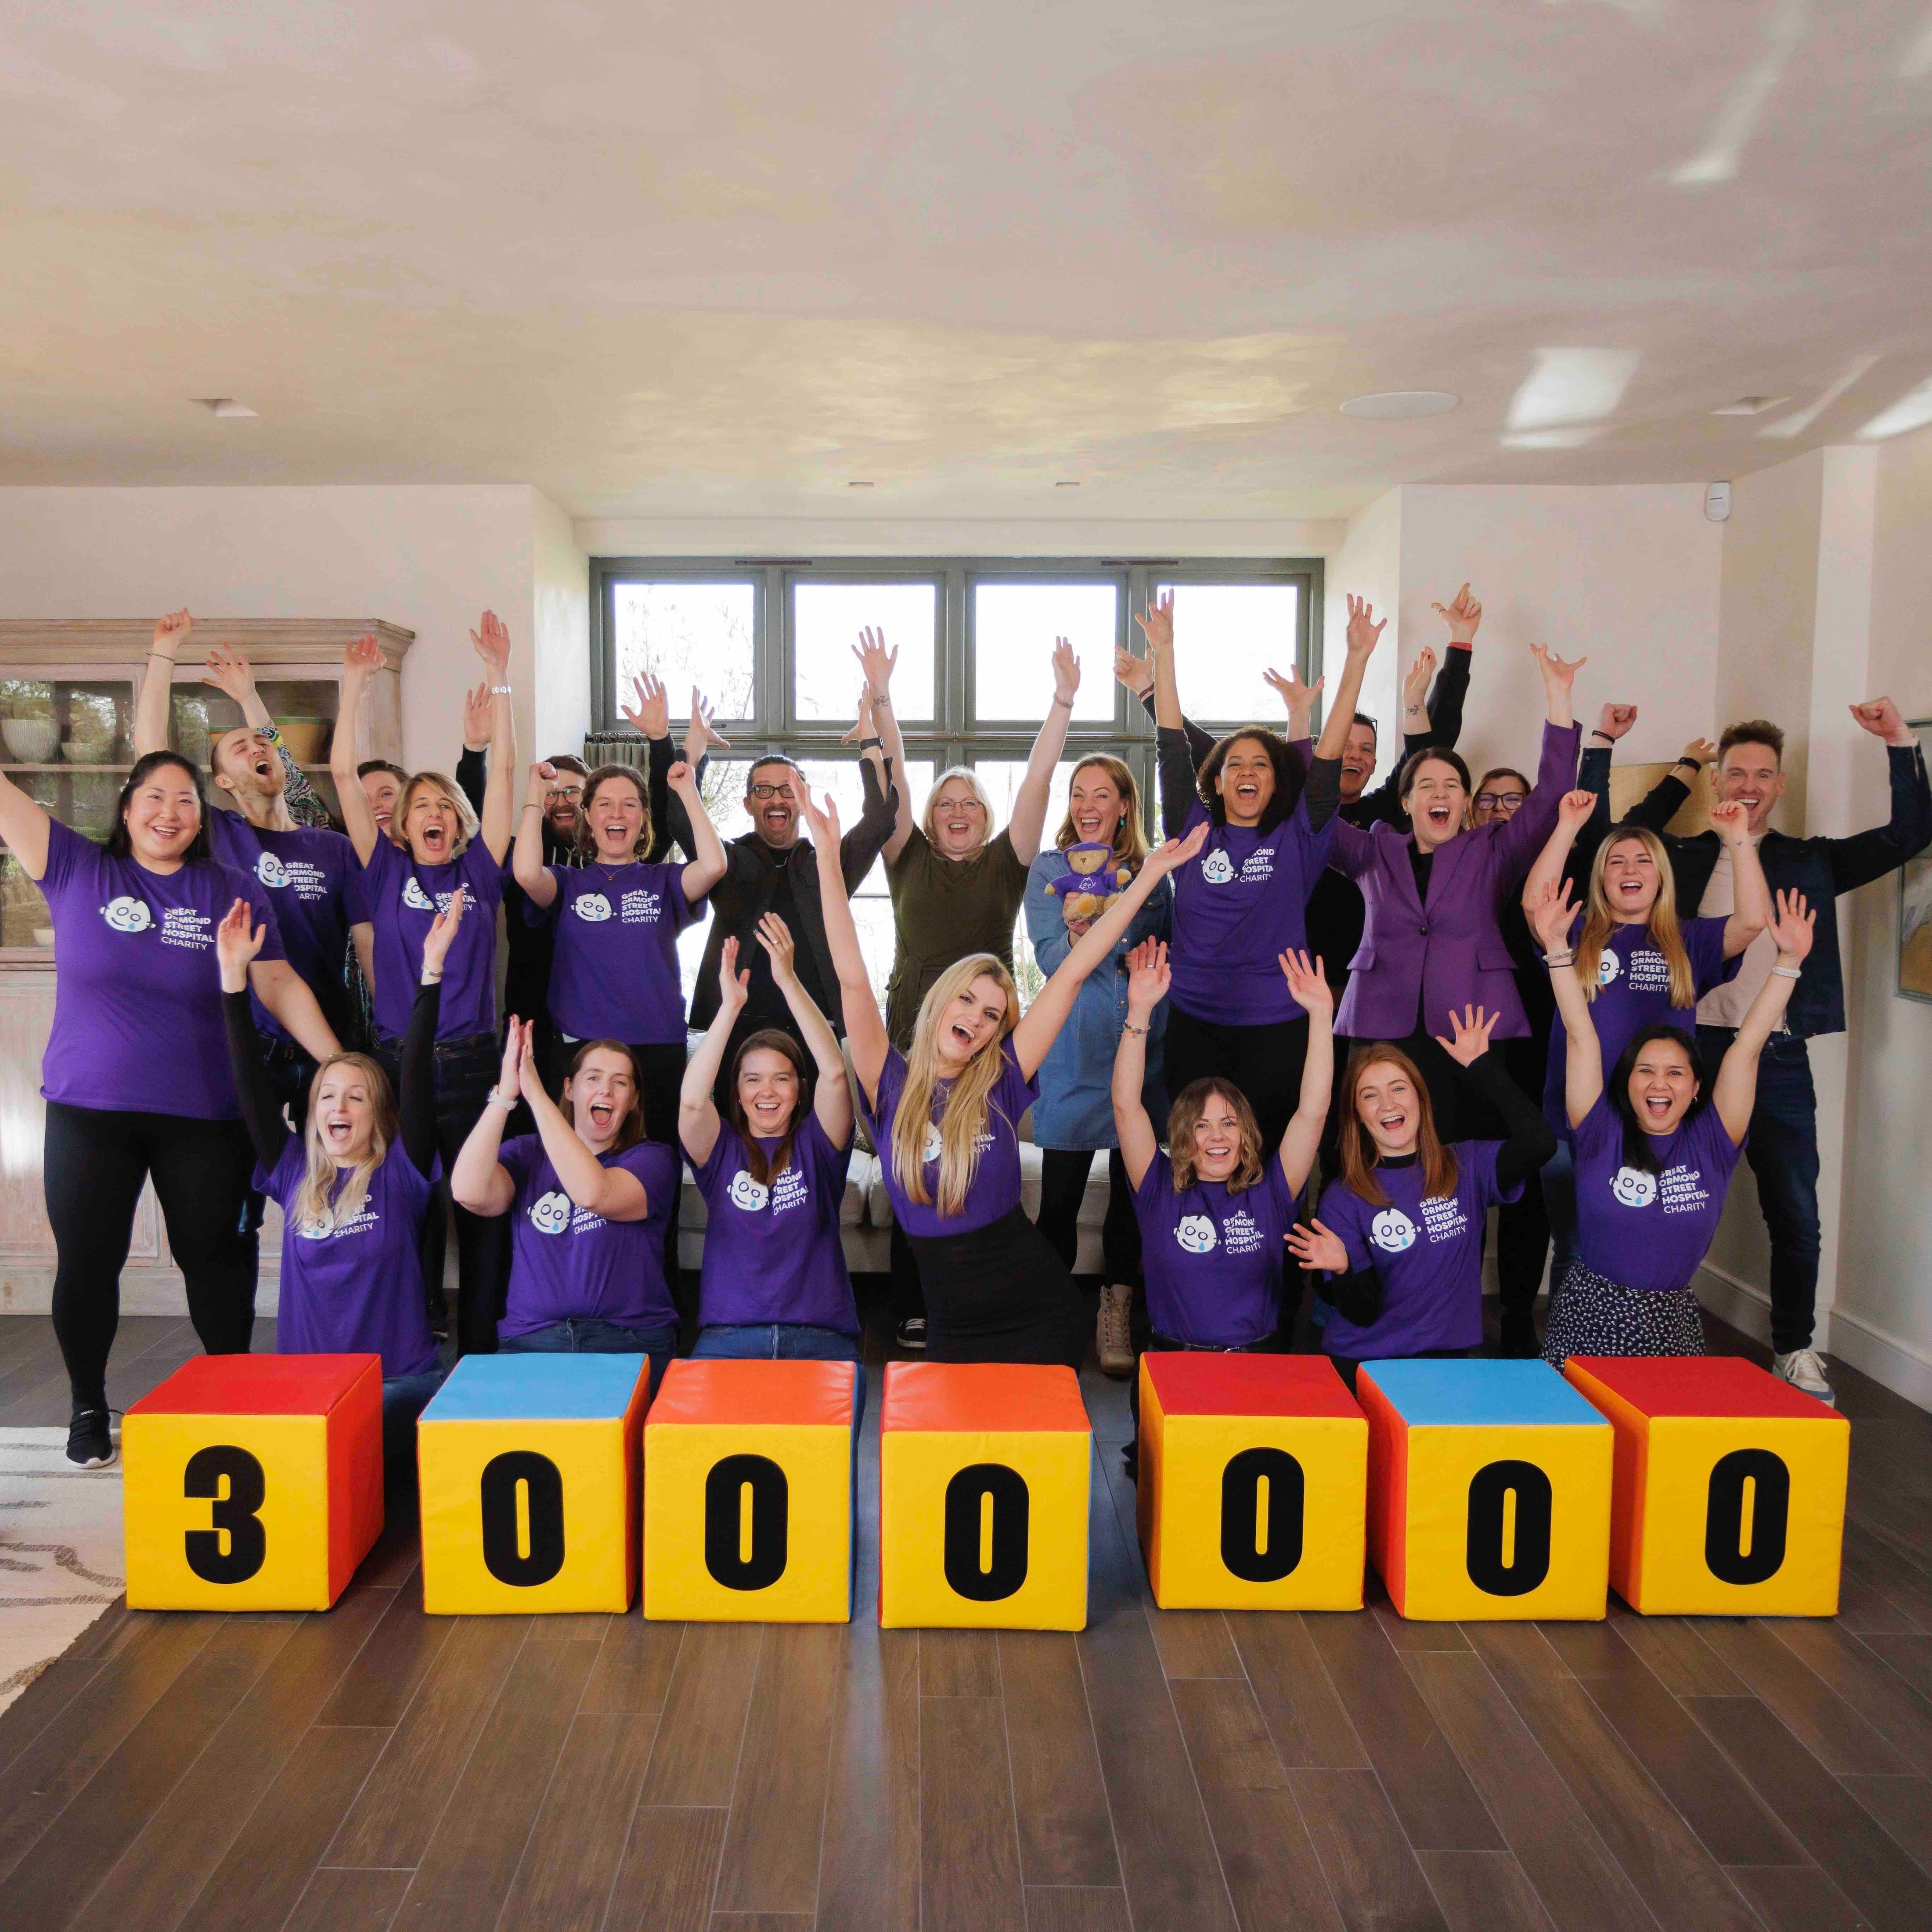 Together We’ve Raised £3,500,000 for GOSH Charity